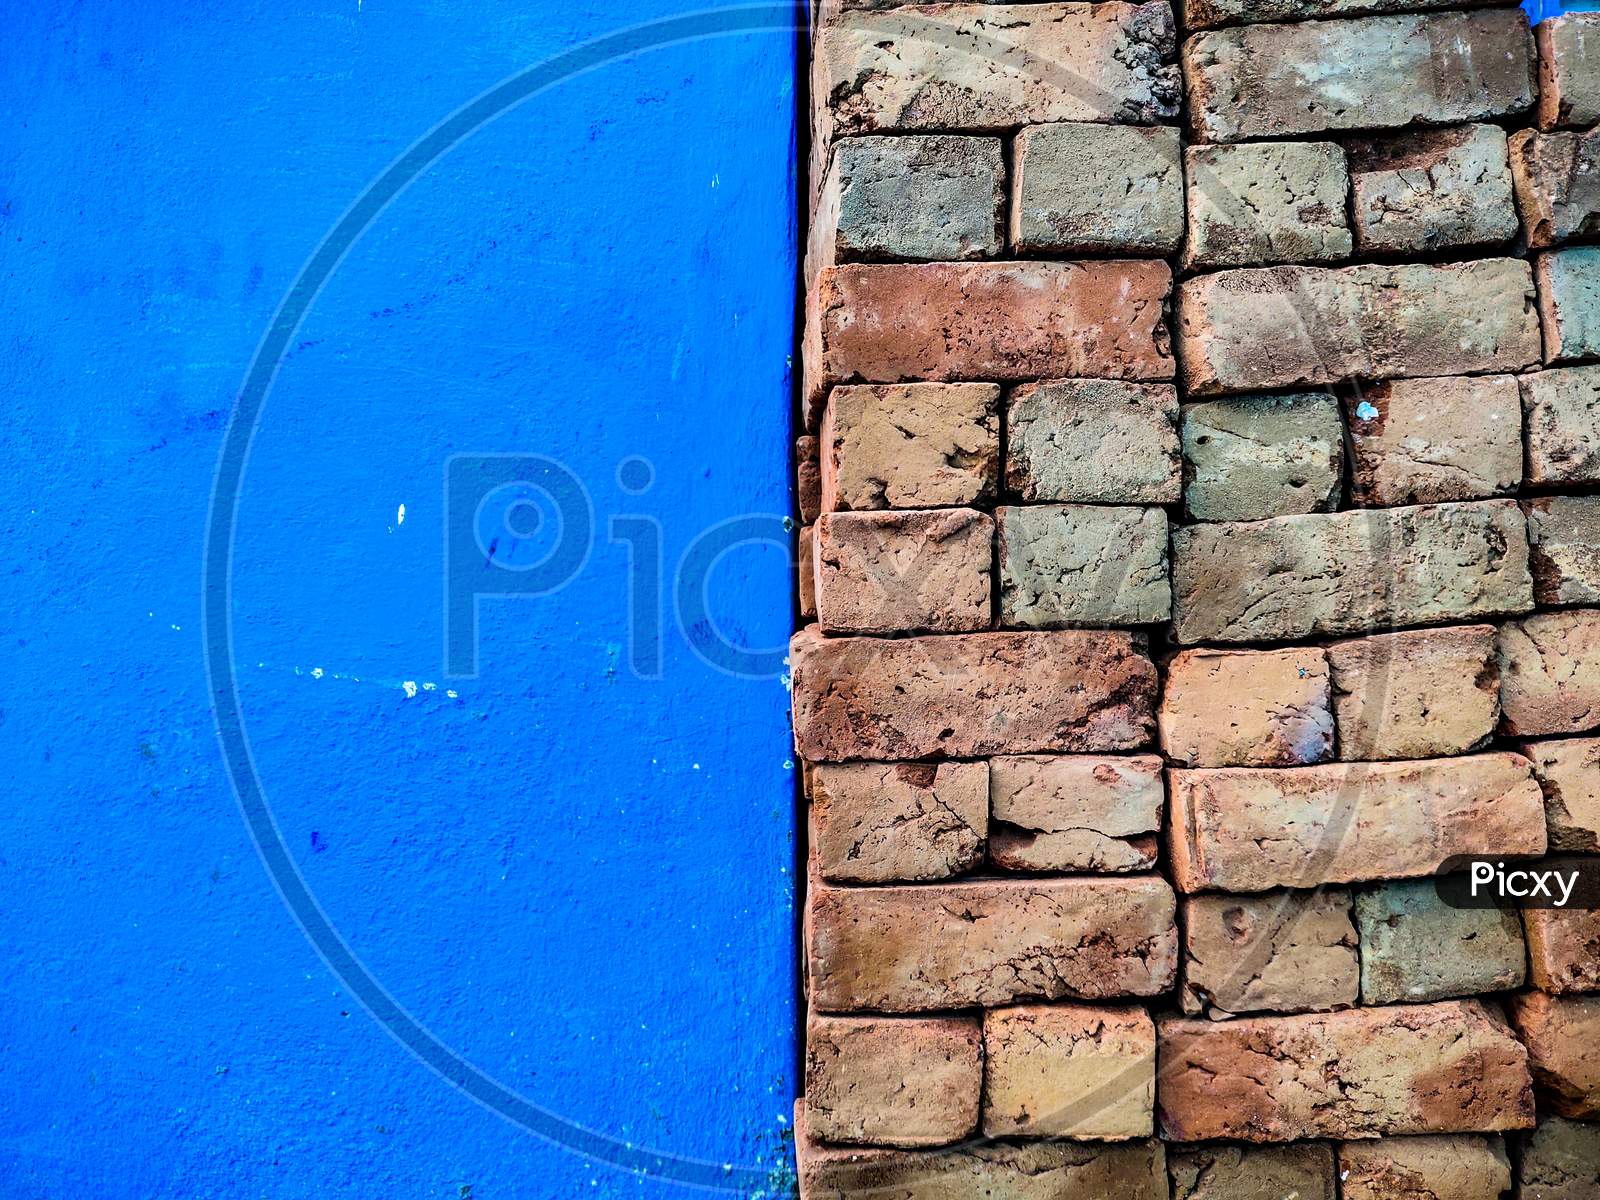 Old Grunge Color Brick Wall Background With Blue Wall Space For Copy Text.